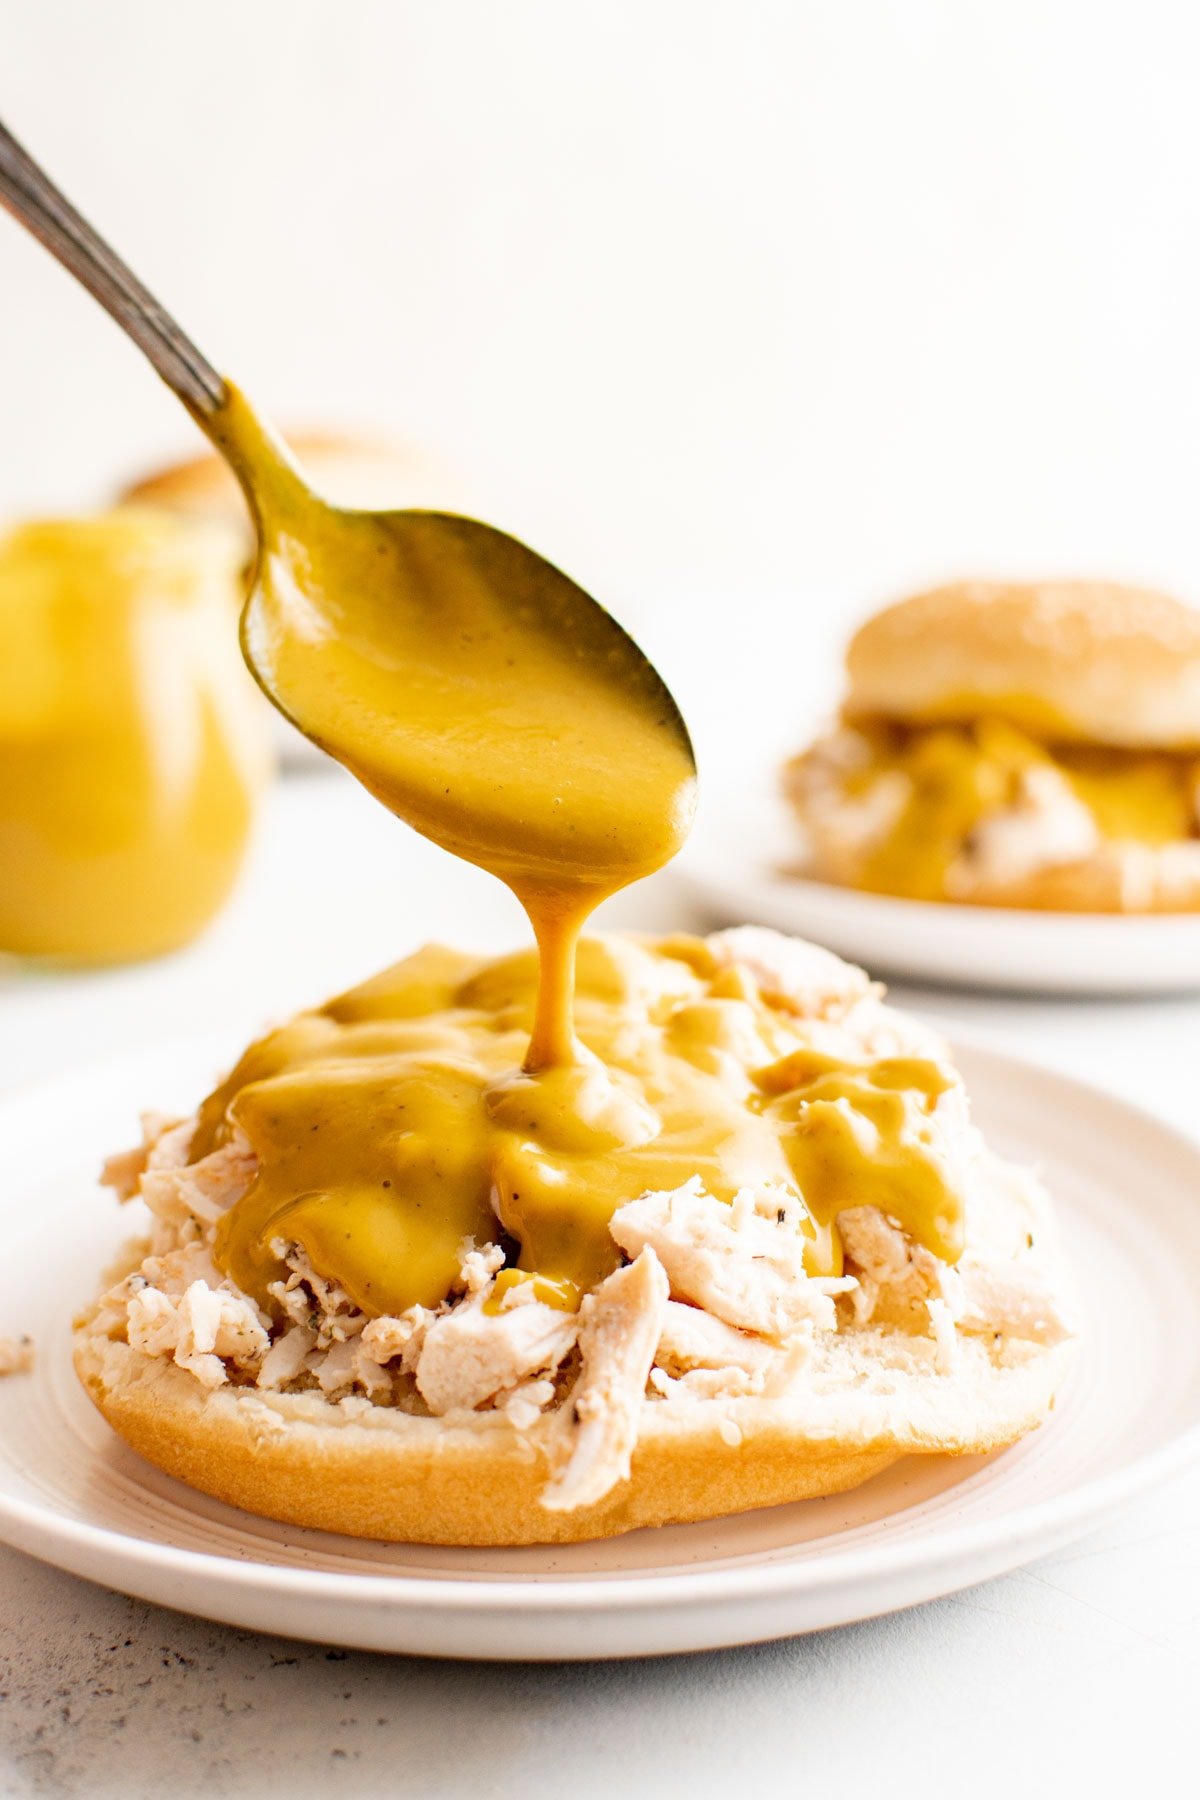 Carolina gold bbq sauce being spooned onto a shredded chicken sandwich. 